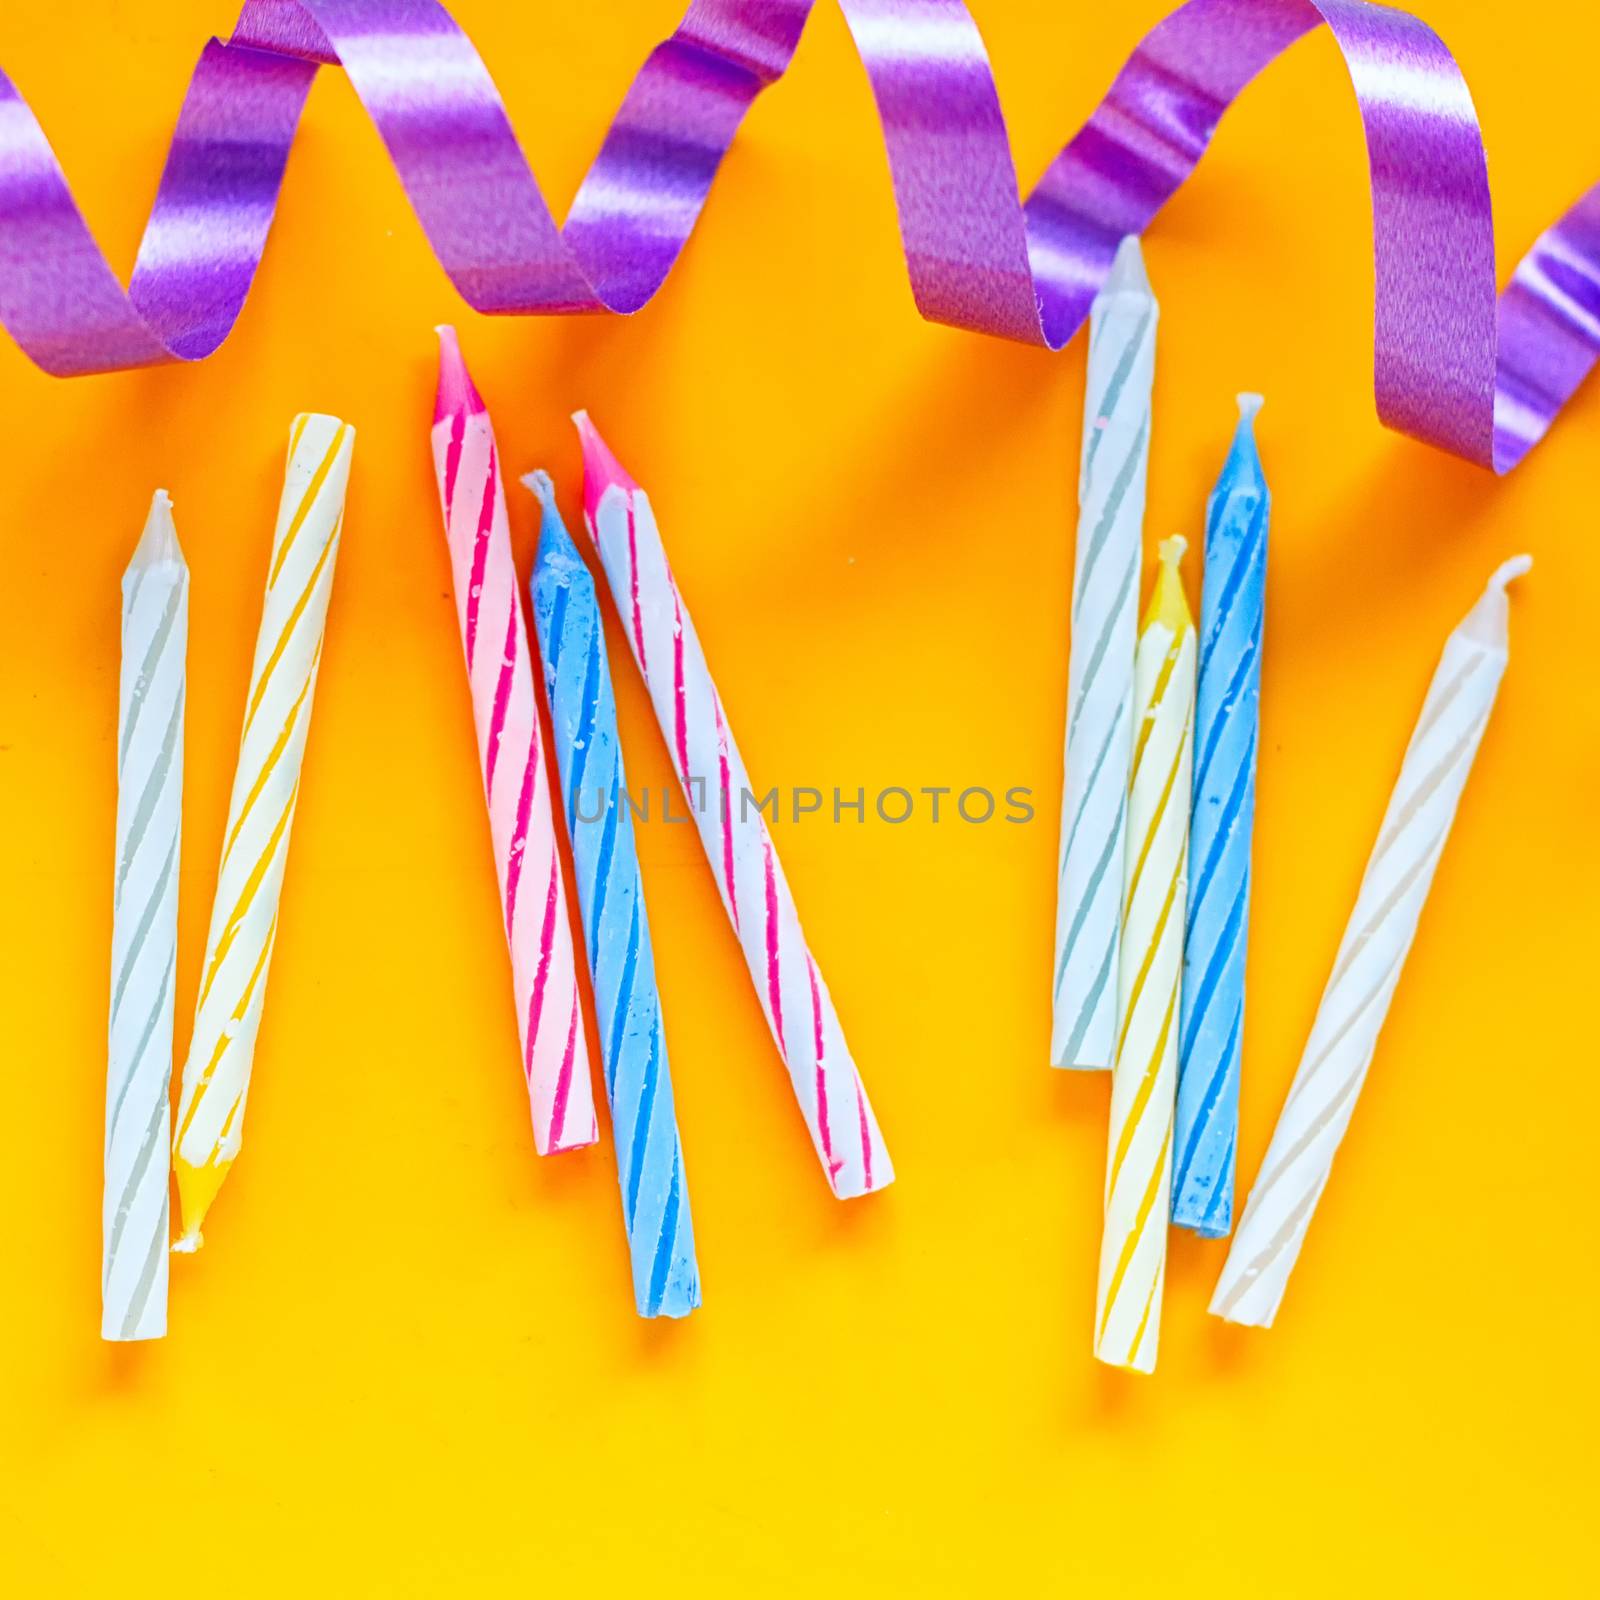 Candles and streamer on a yellow background